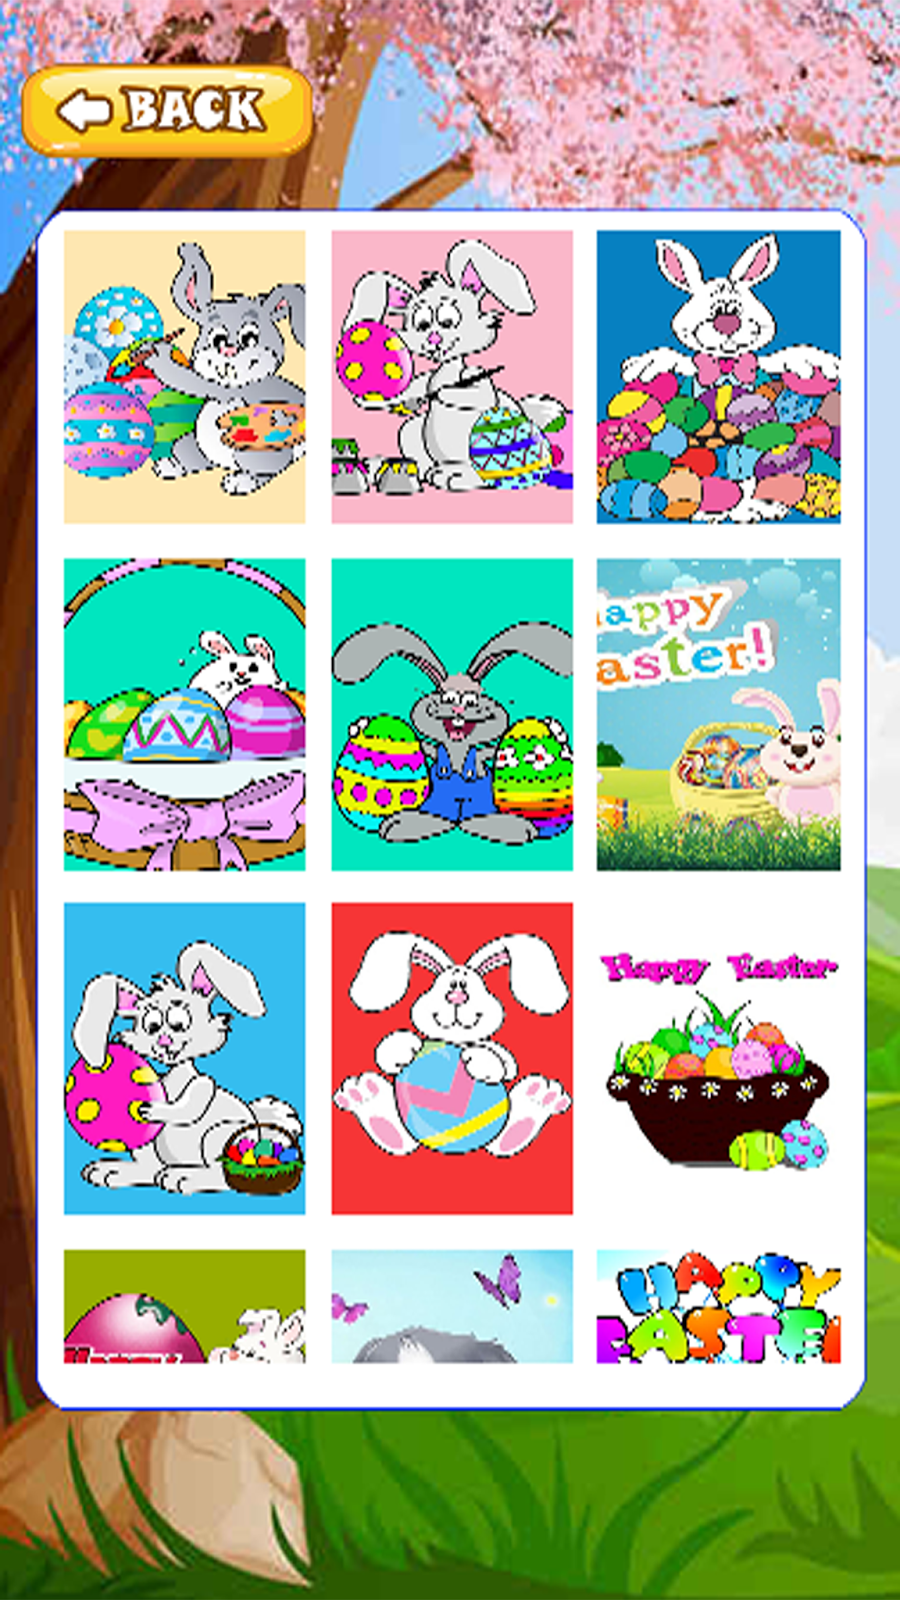 jigsaw-puzzles-for-kids-games-easter-day-version